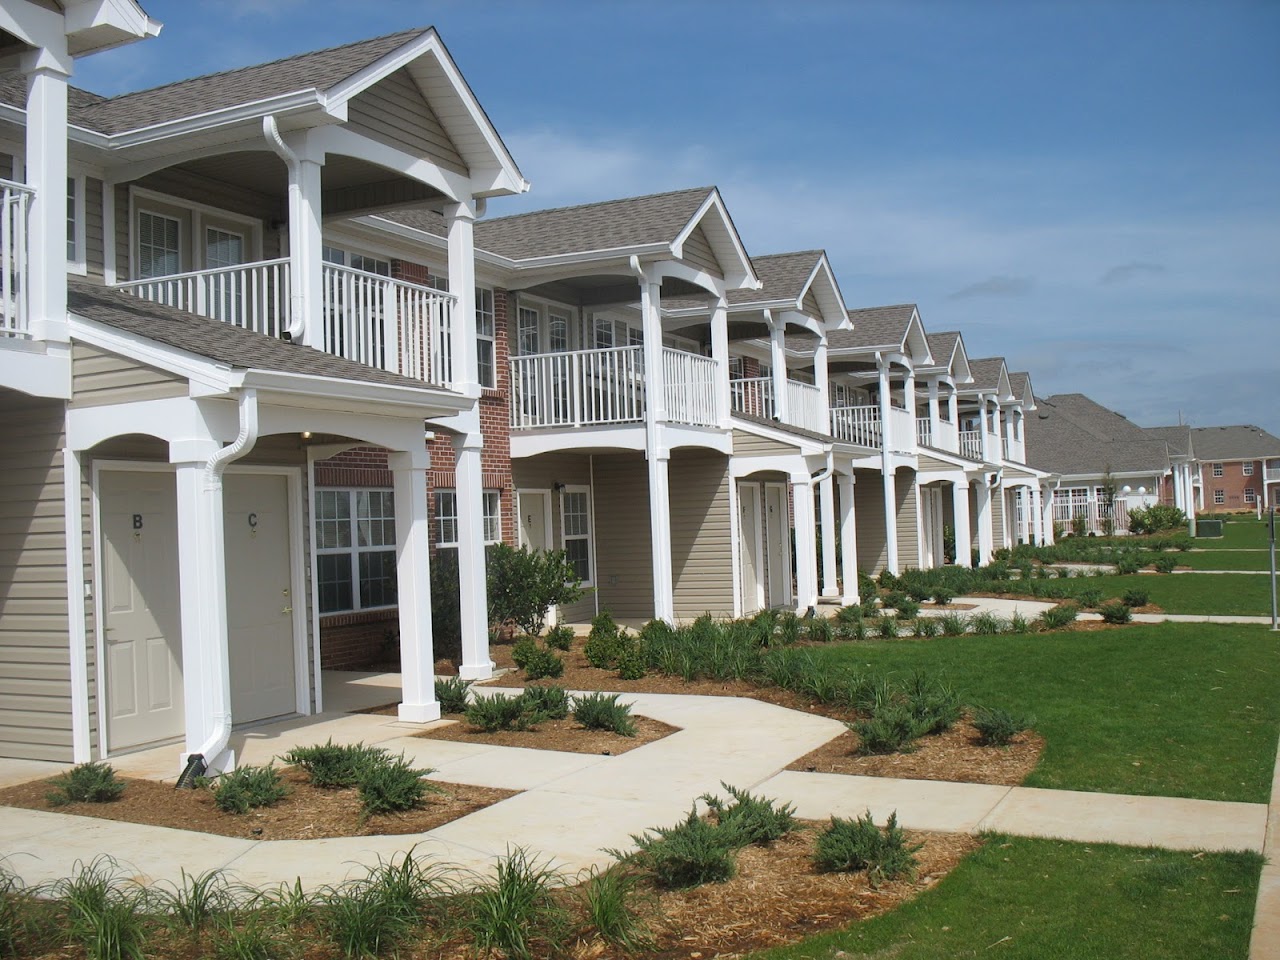 Photo of ALISON POINTE APTS at 9921 BETHANY DR FOLEY, AL 36535